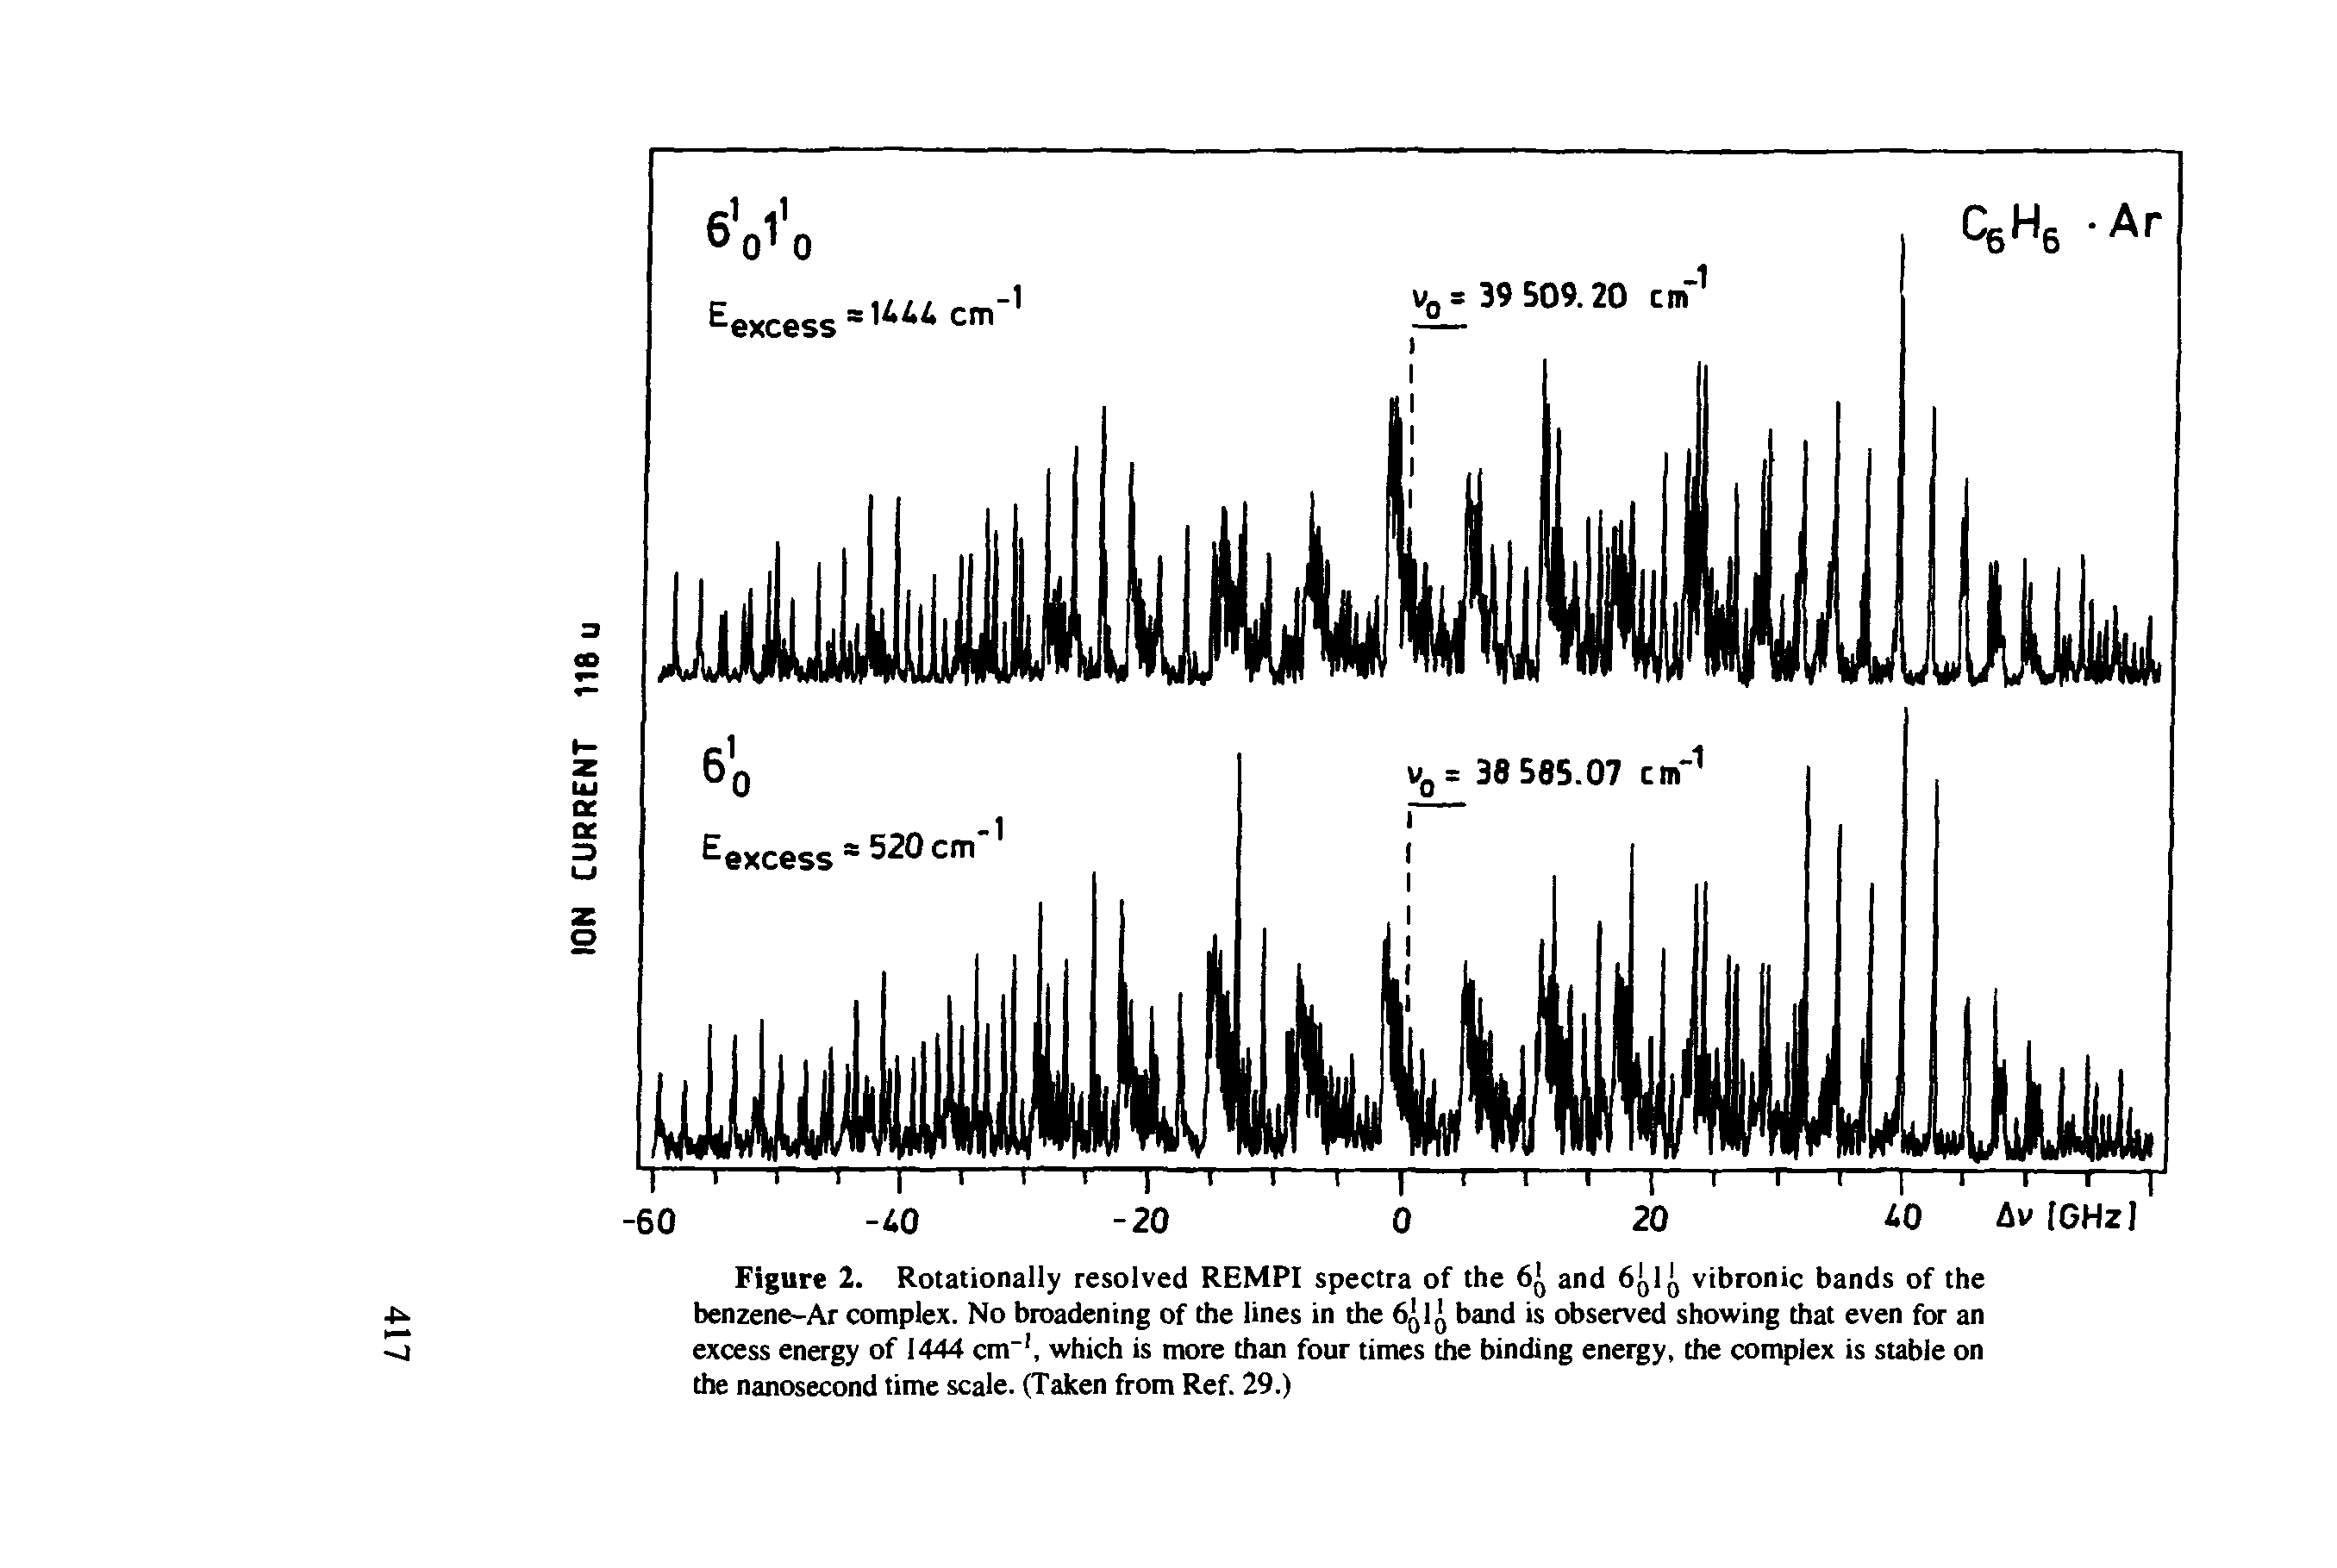 Figure 2. Rotationally resolved REMPI spectra of the 6 and 6 1 vibronic bands of the benzene-Ar complex. No broadening of the lines in the 6q1 band is observed showing that even for an excess energy of 1444 cm-1, which is more than four times the binding energy, the complex is stable on the nanosecond time scale. (Taken from Ref. 29.)...